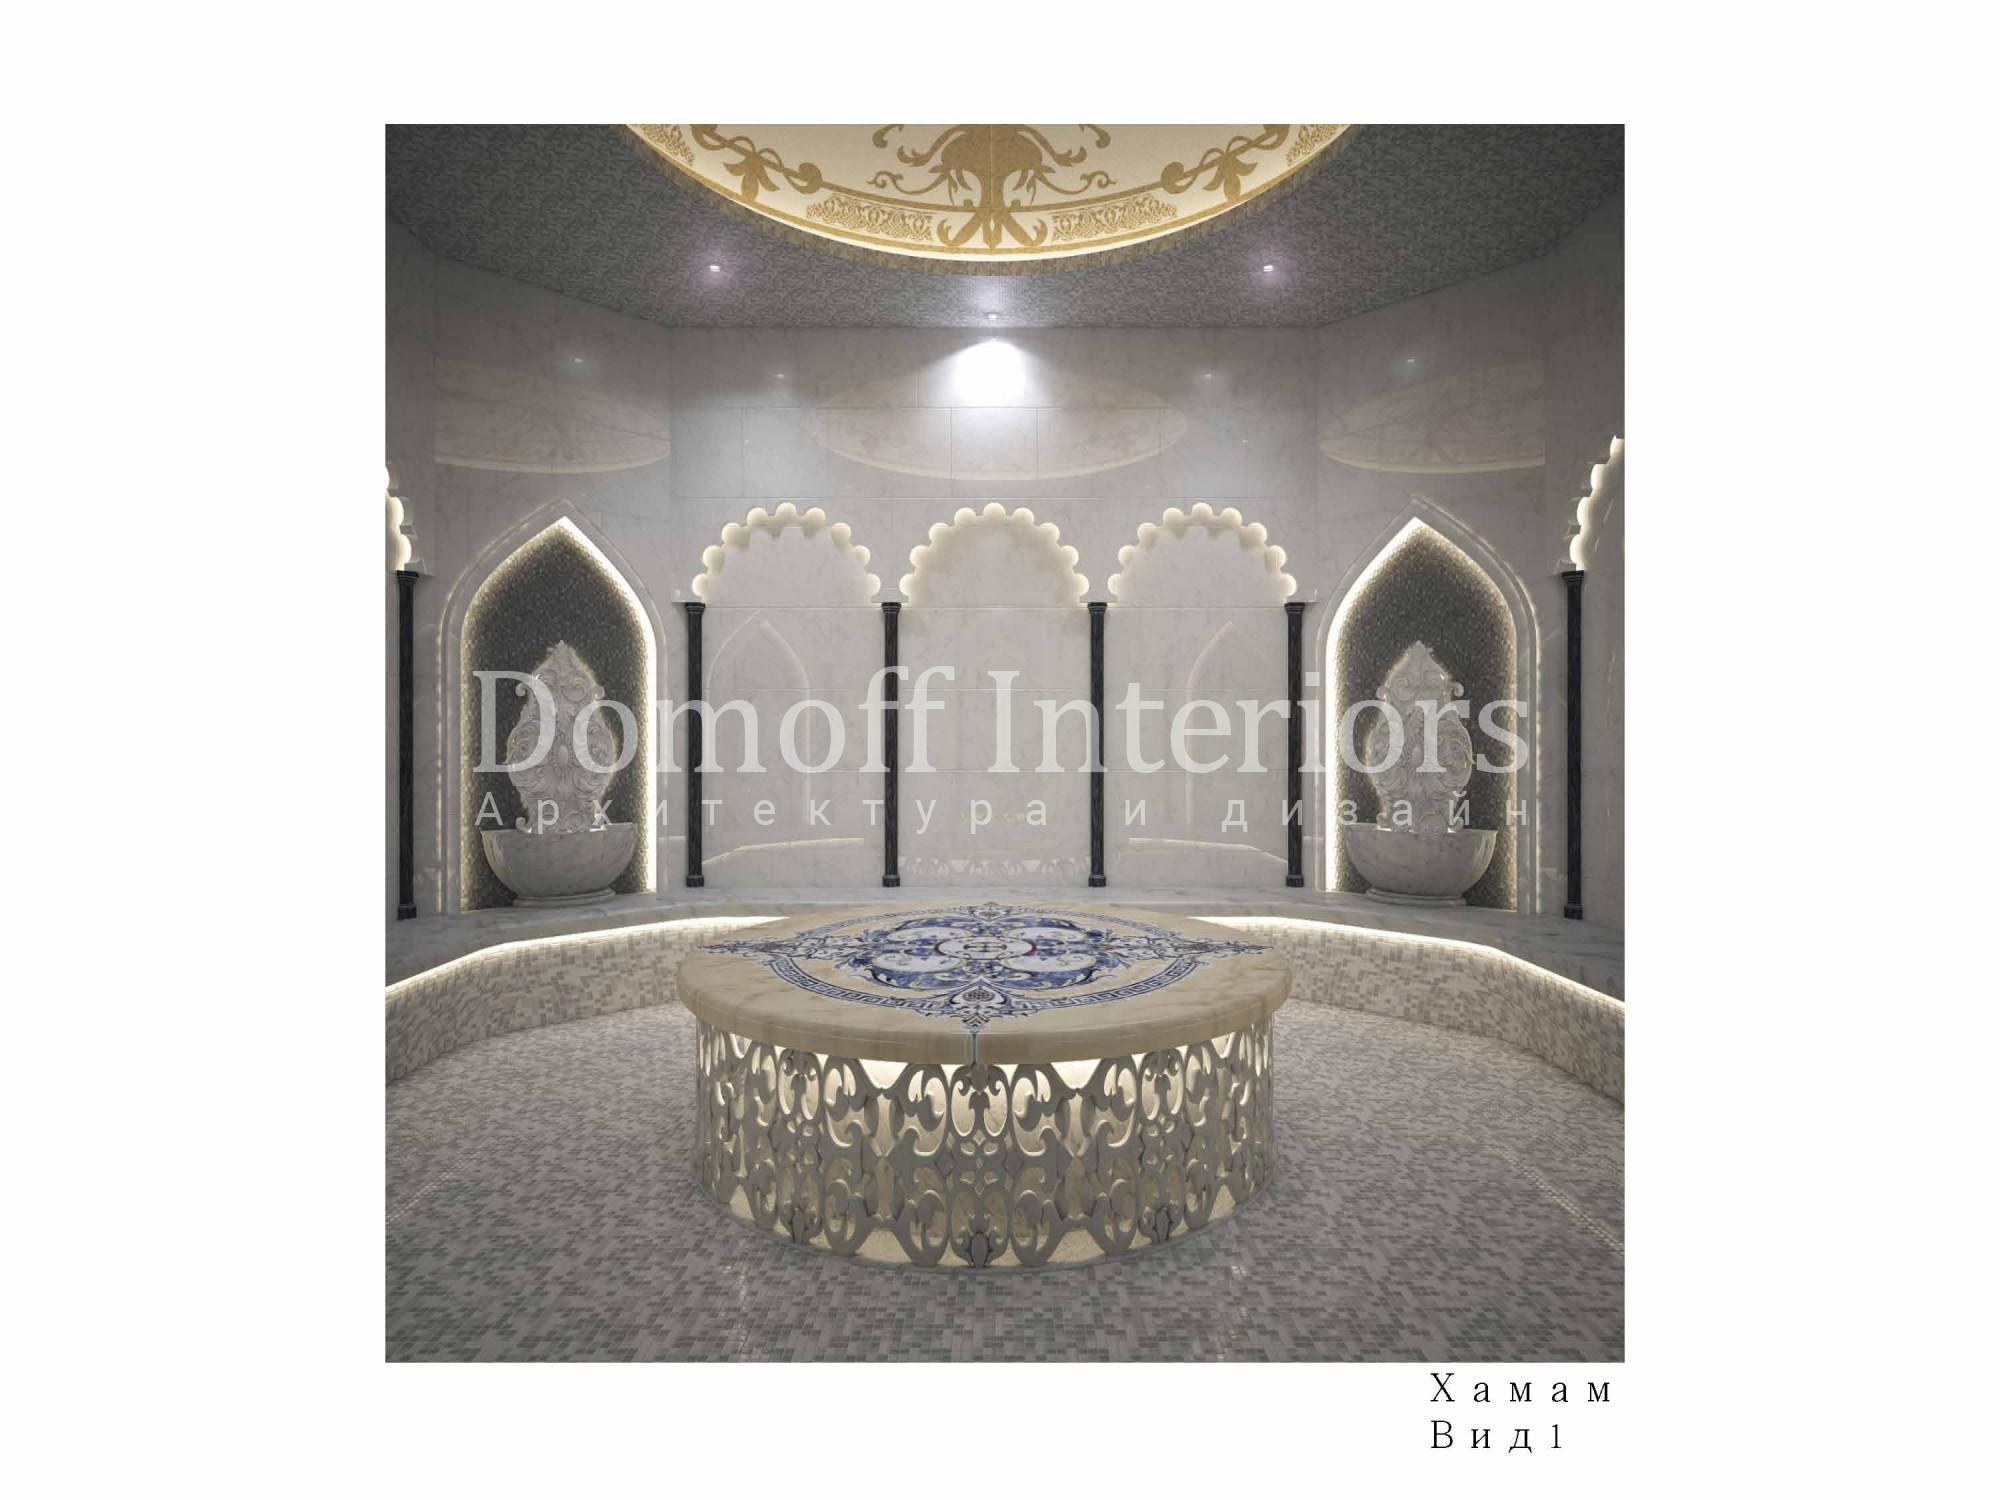 Hammam made in the style of Contemporary